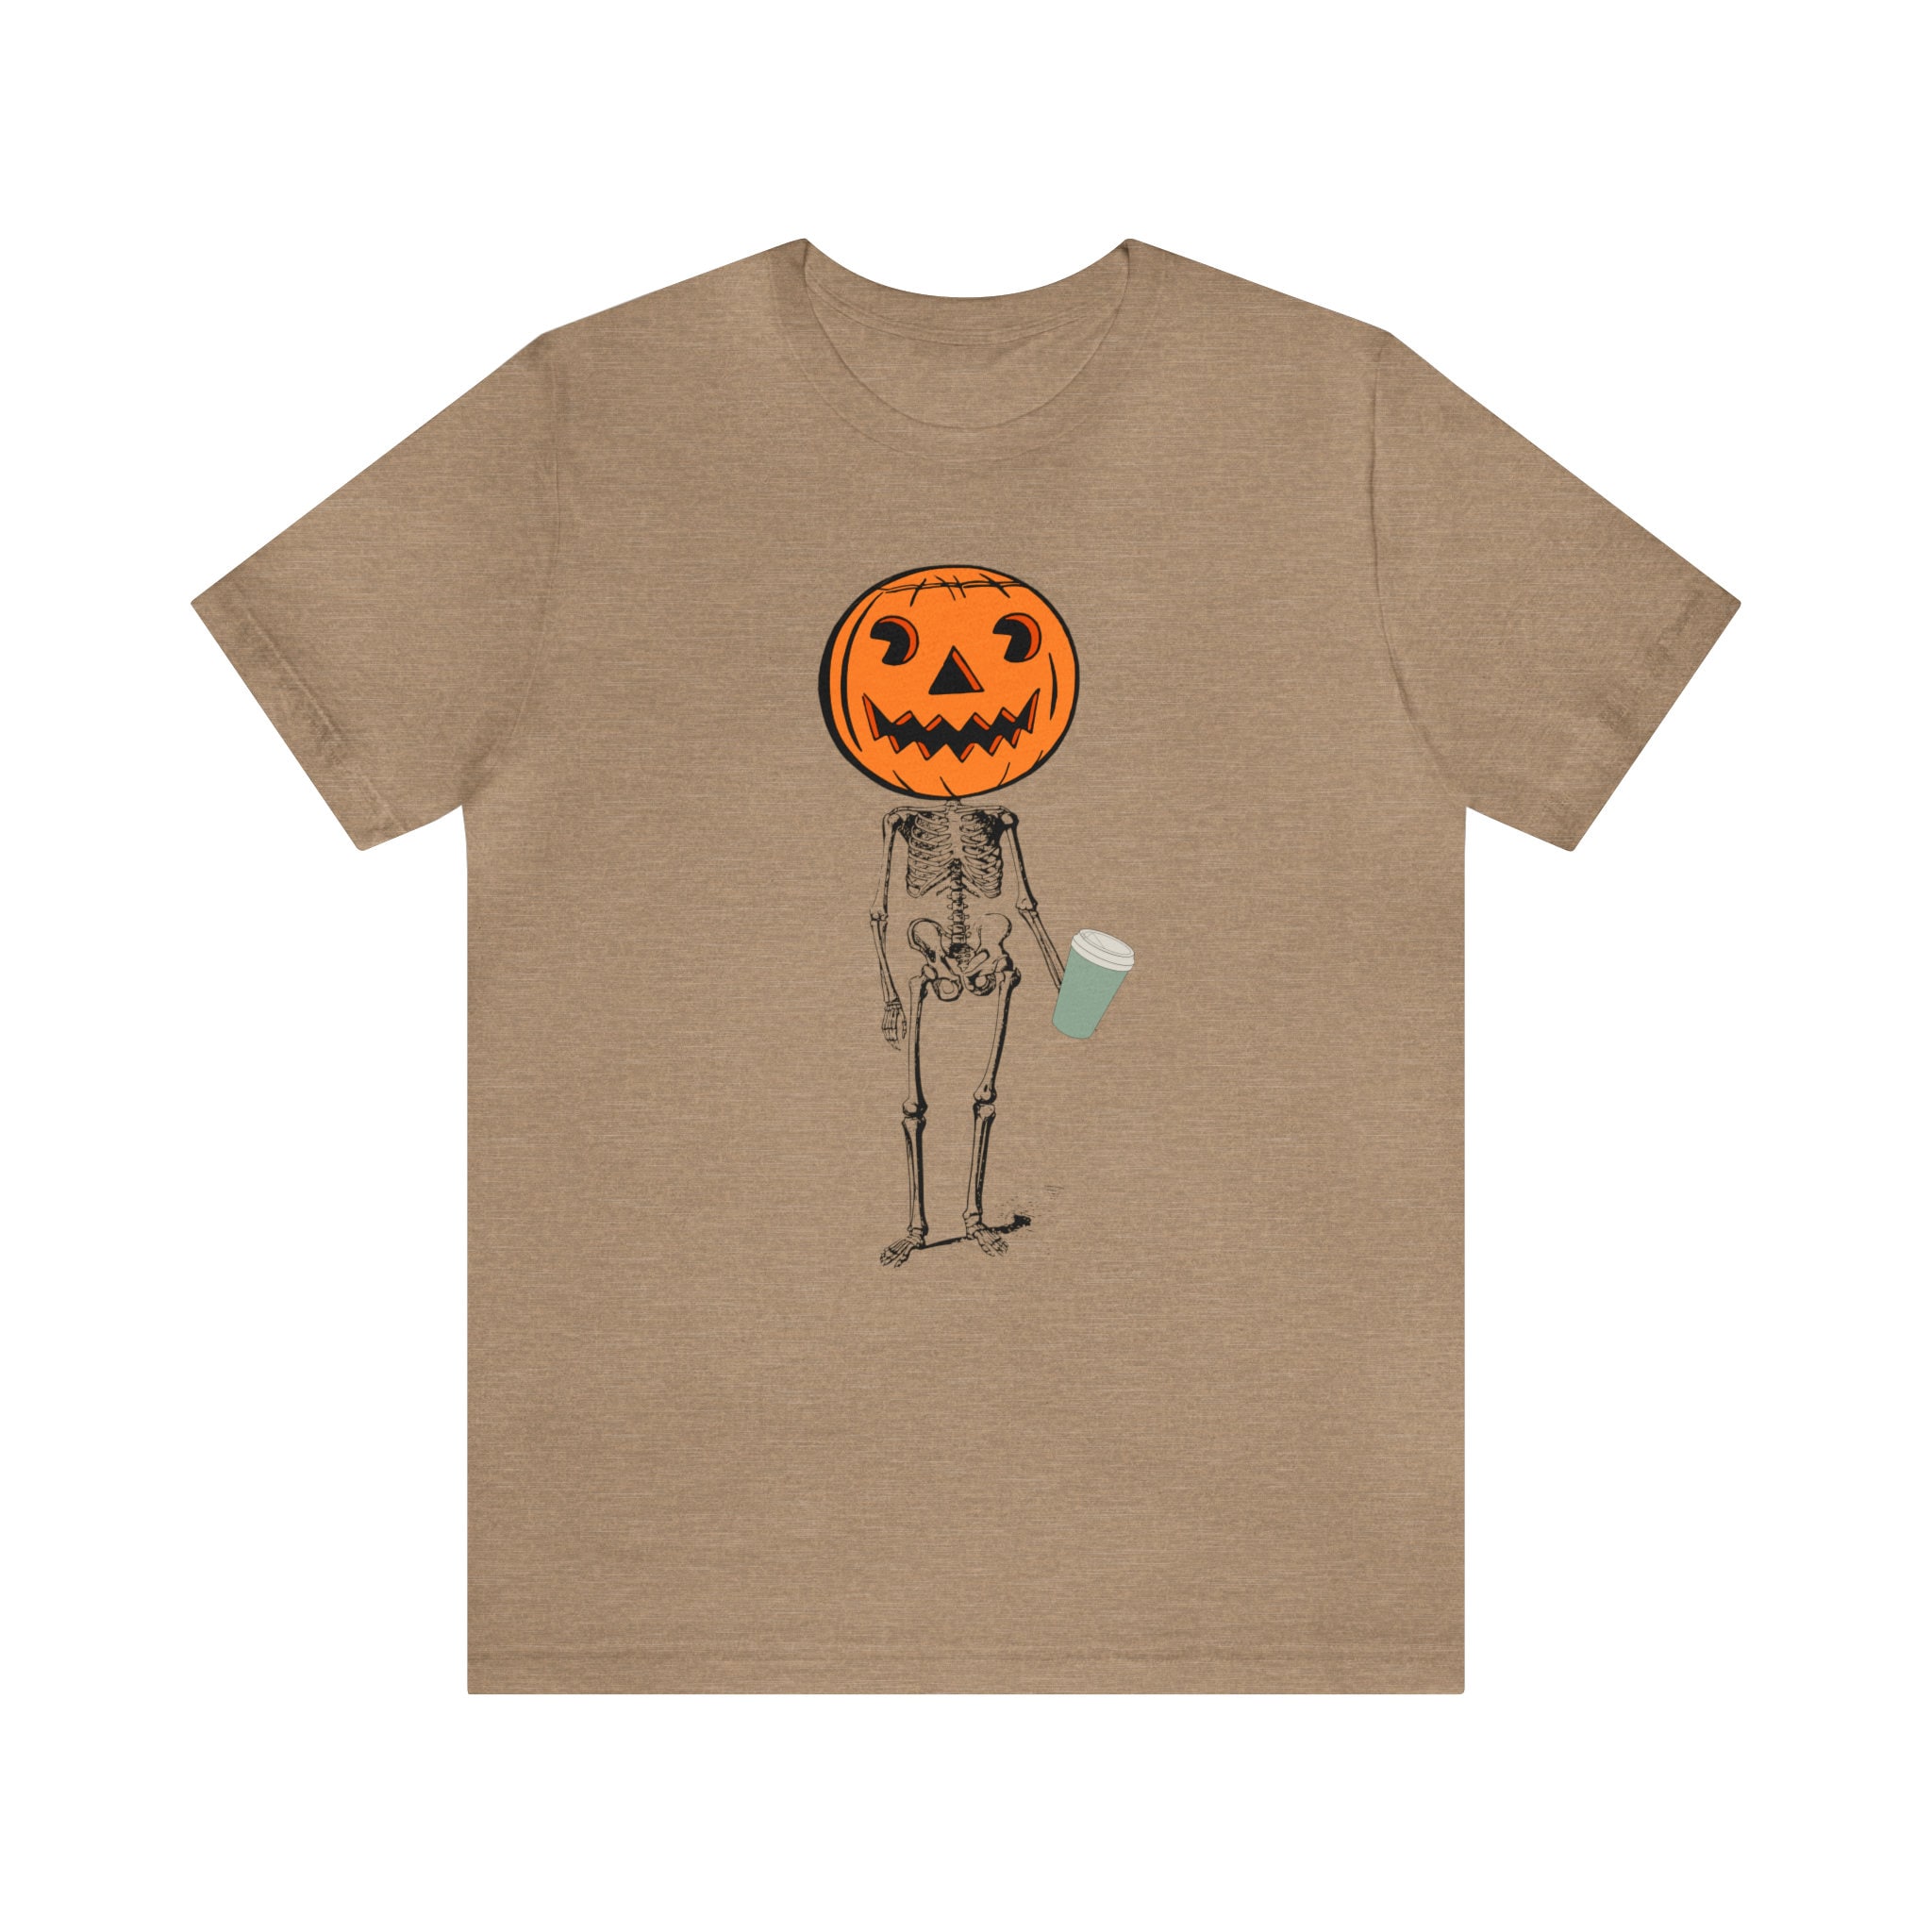 Discover Fall Shirt, Happy Skeleton Jack O Lantern Tee, Pumpkin Spice Drinking Skeleton, Mens and Womens Tee, Fall Colors  Design